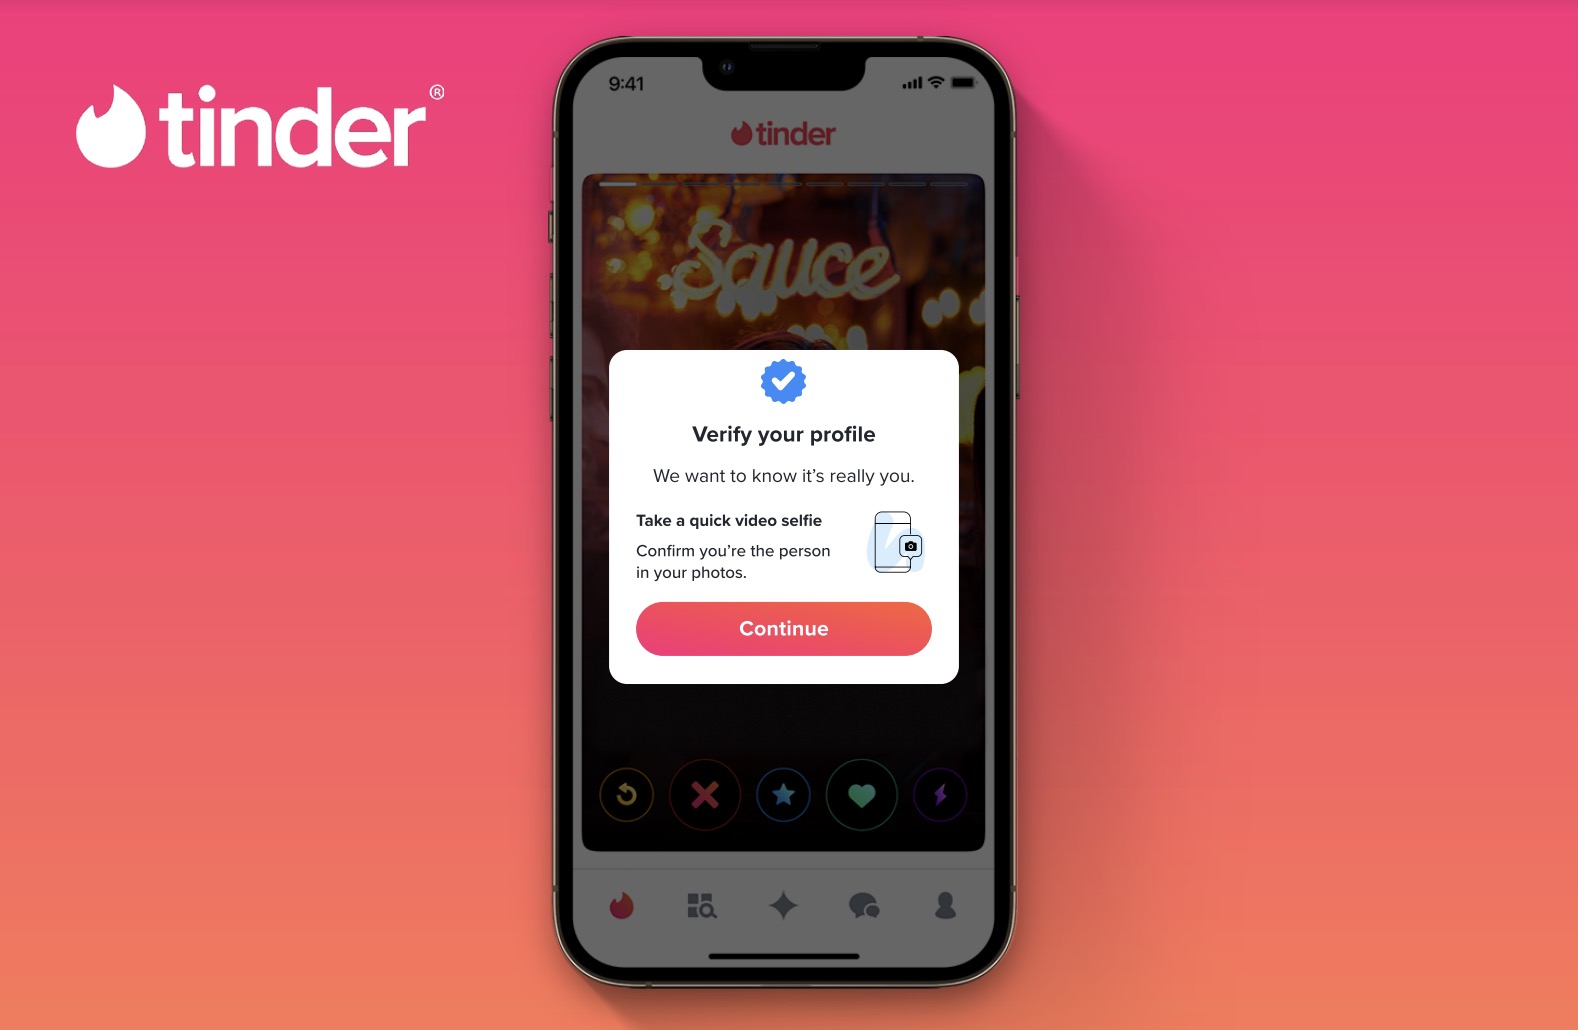 Tinder’s verification process will now use AI and video selfies